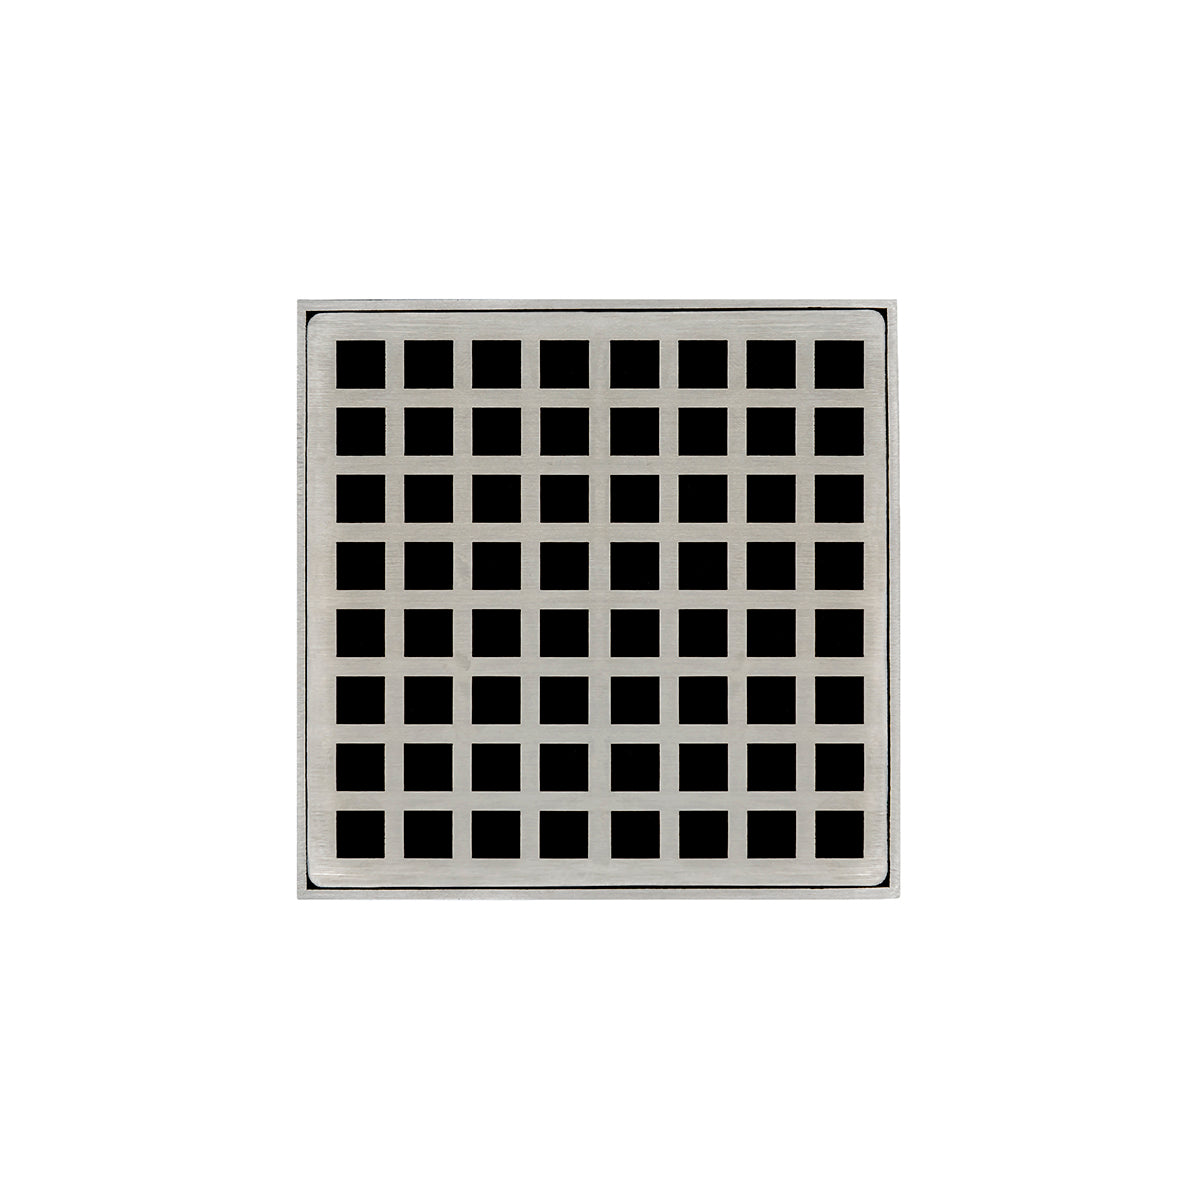 Infinity Drain 5" x 5" Strainer Premium Center Drain Kit with Squares Pattern Decorative Plate and 2" Throat for QD 5